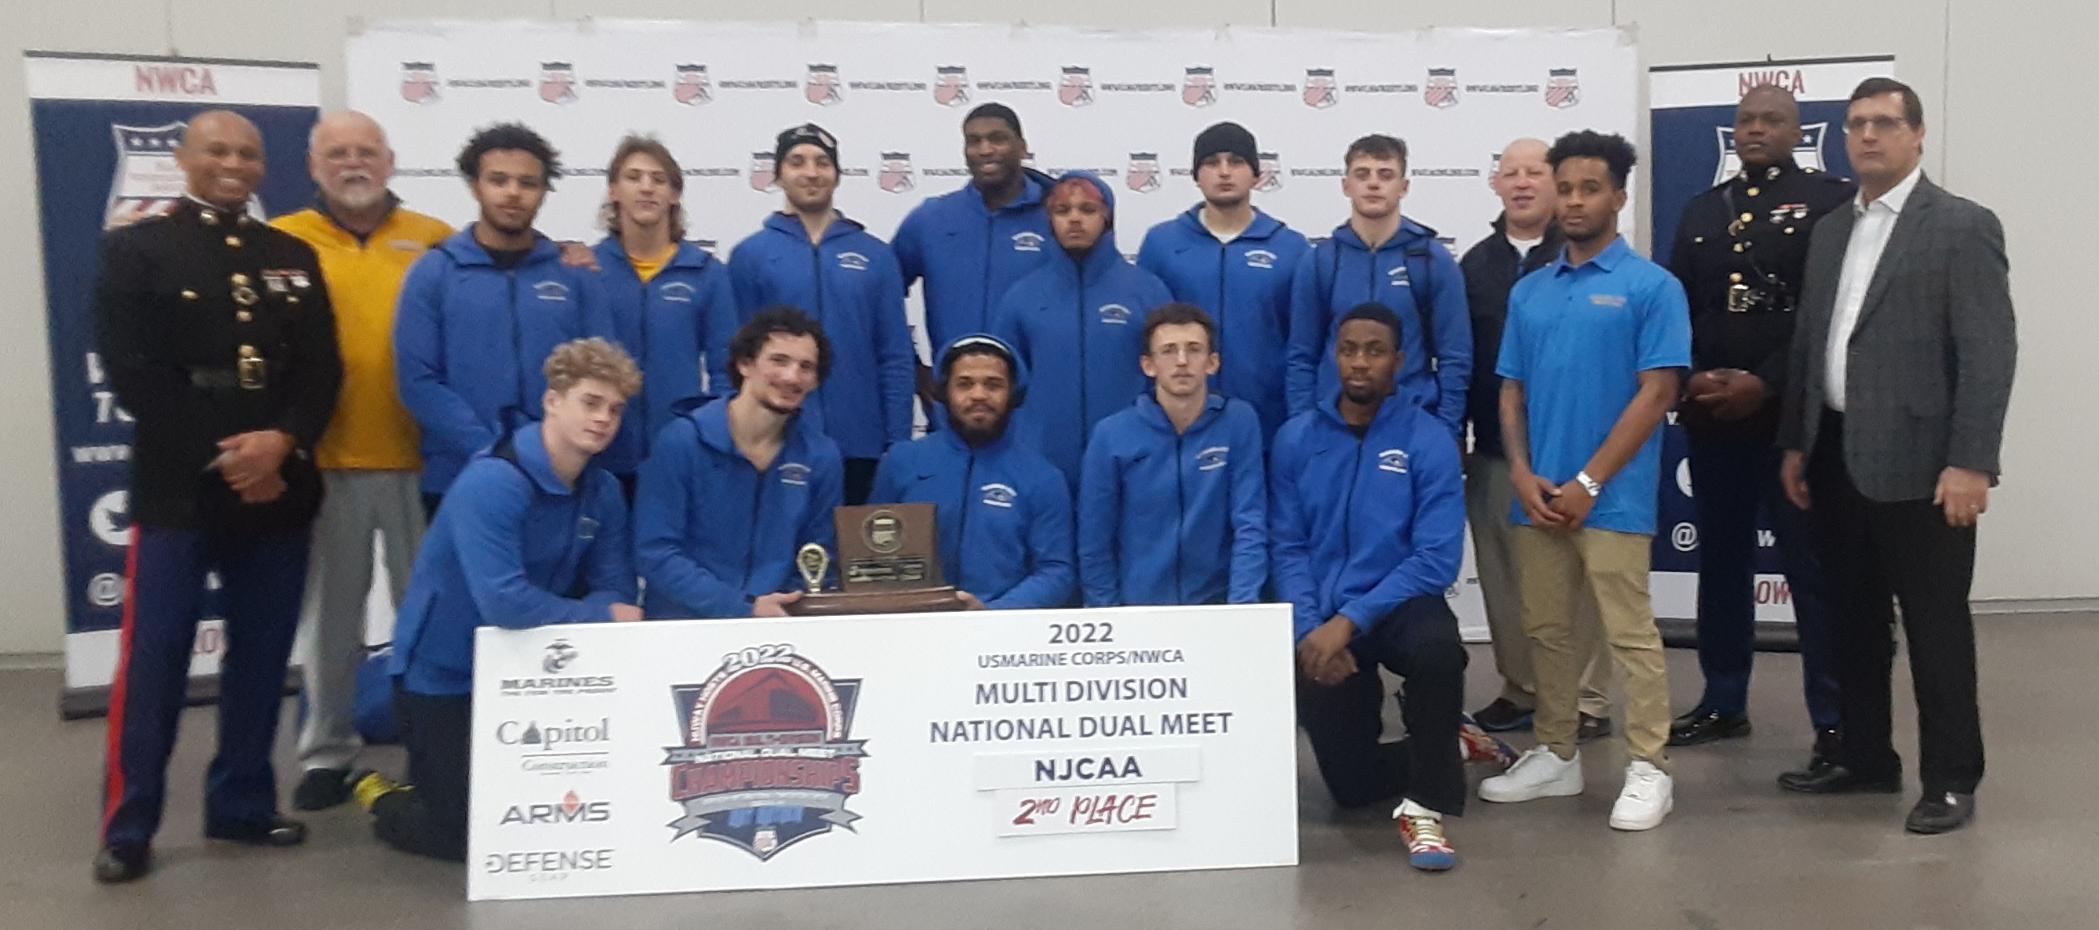 NCCC takes second place at National Duals